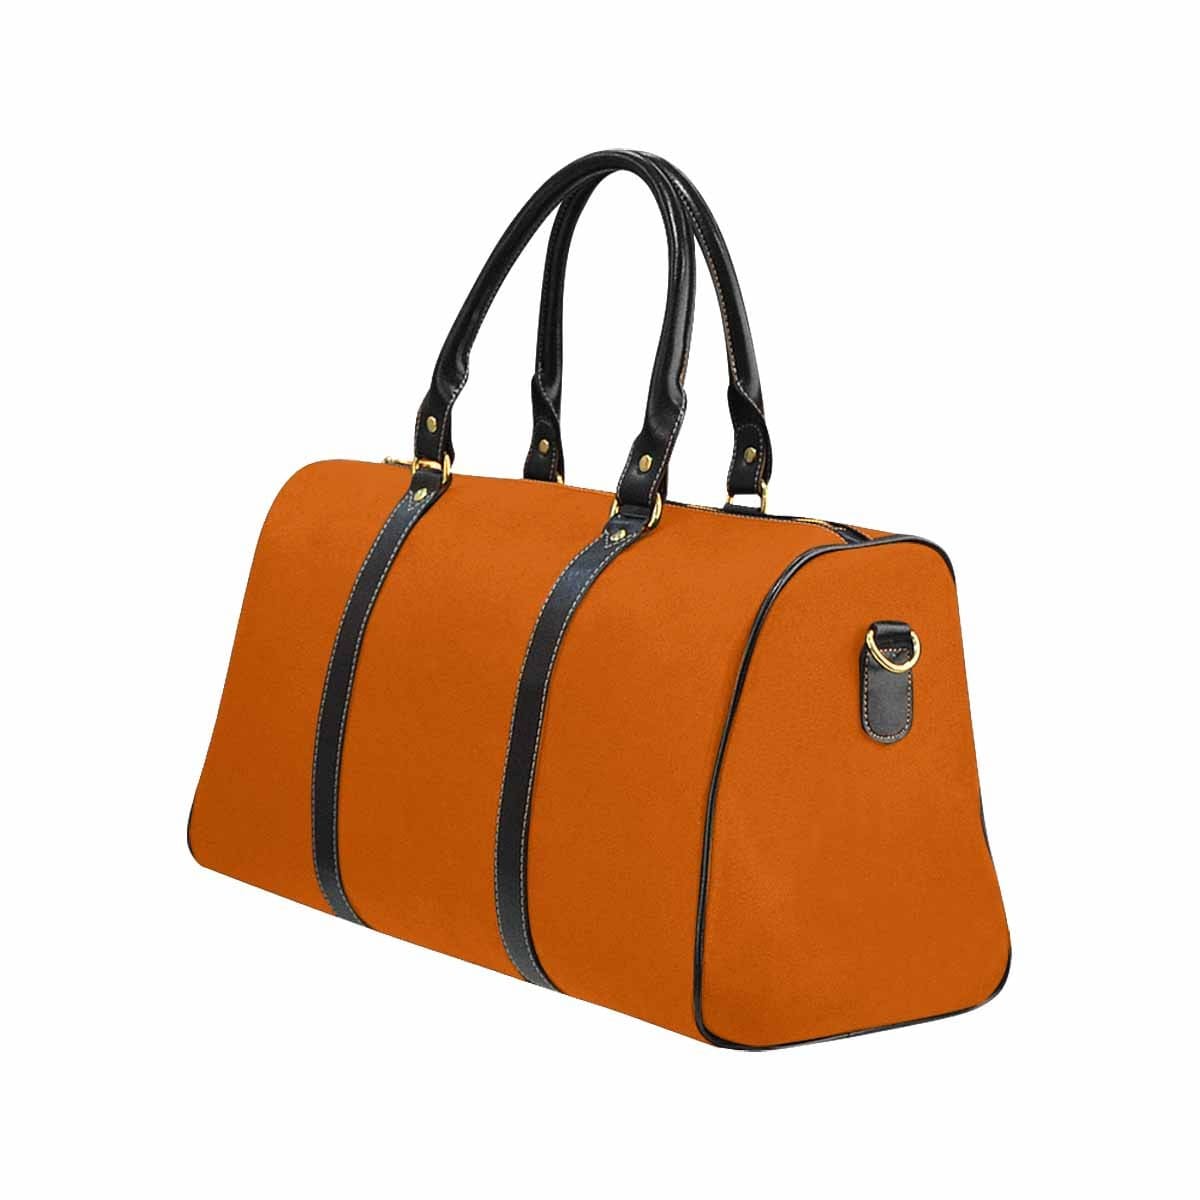 Travel Bag Leather Carry On Large Luggage Bag Burnt Orange - Bags | Travel Bags